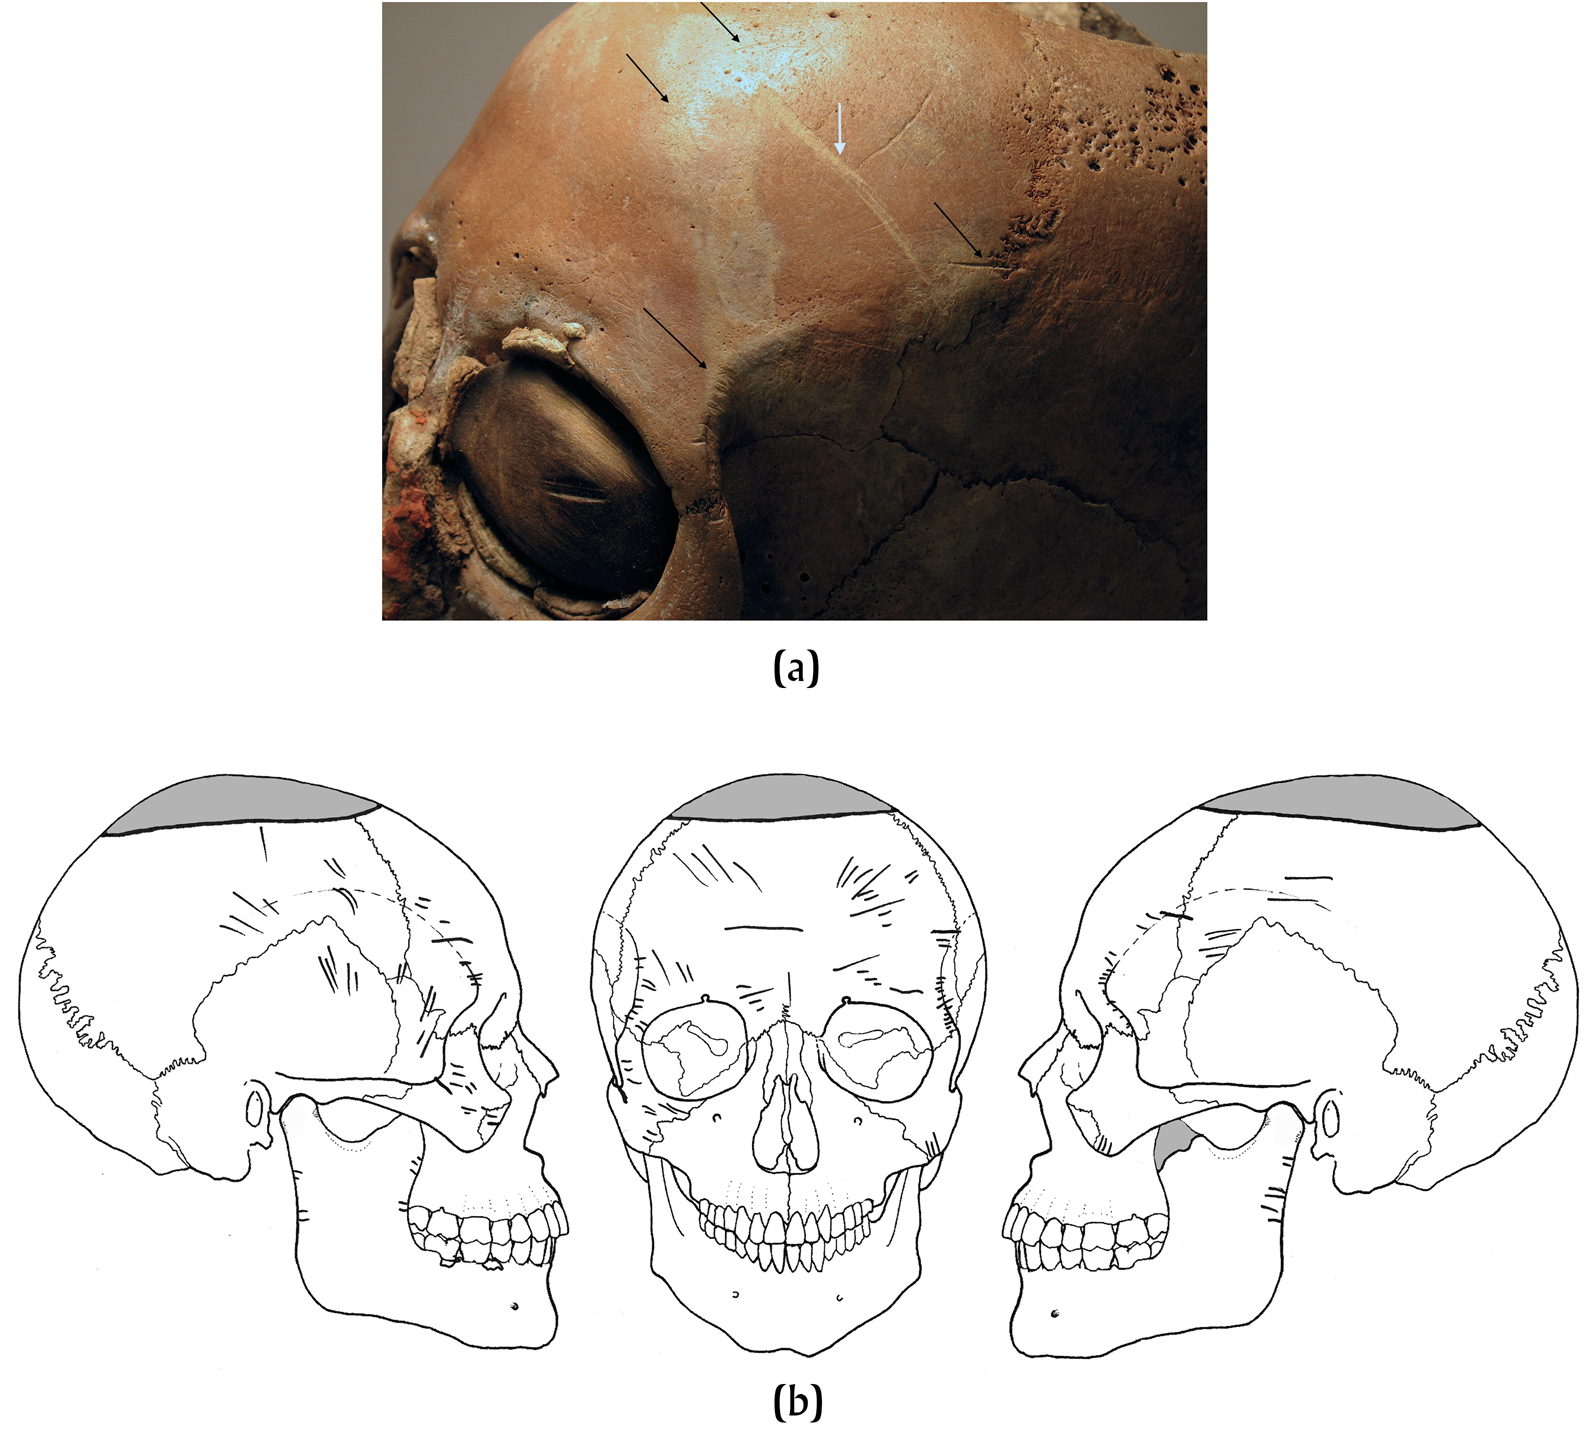 Human trophies in Central Mexican cultures. (a) Basal register of a